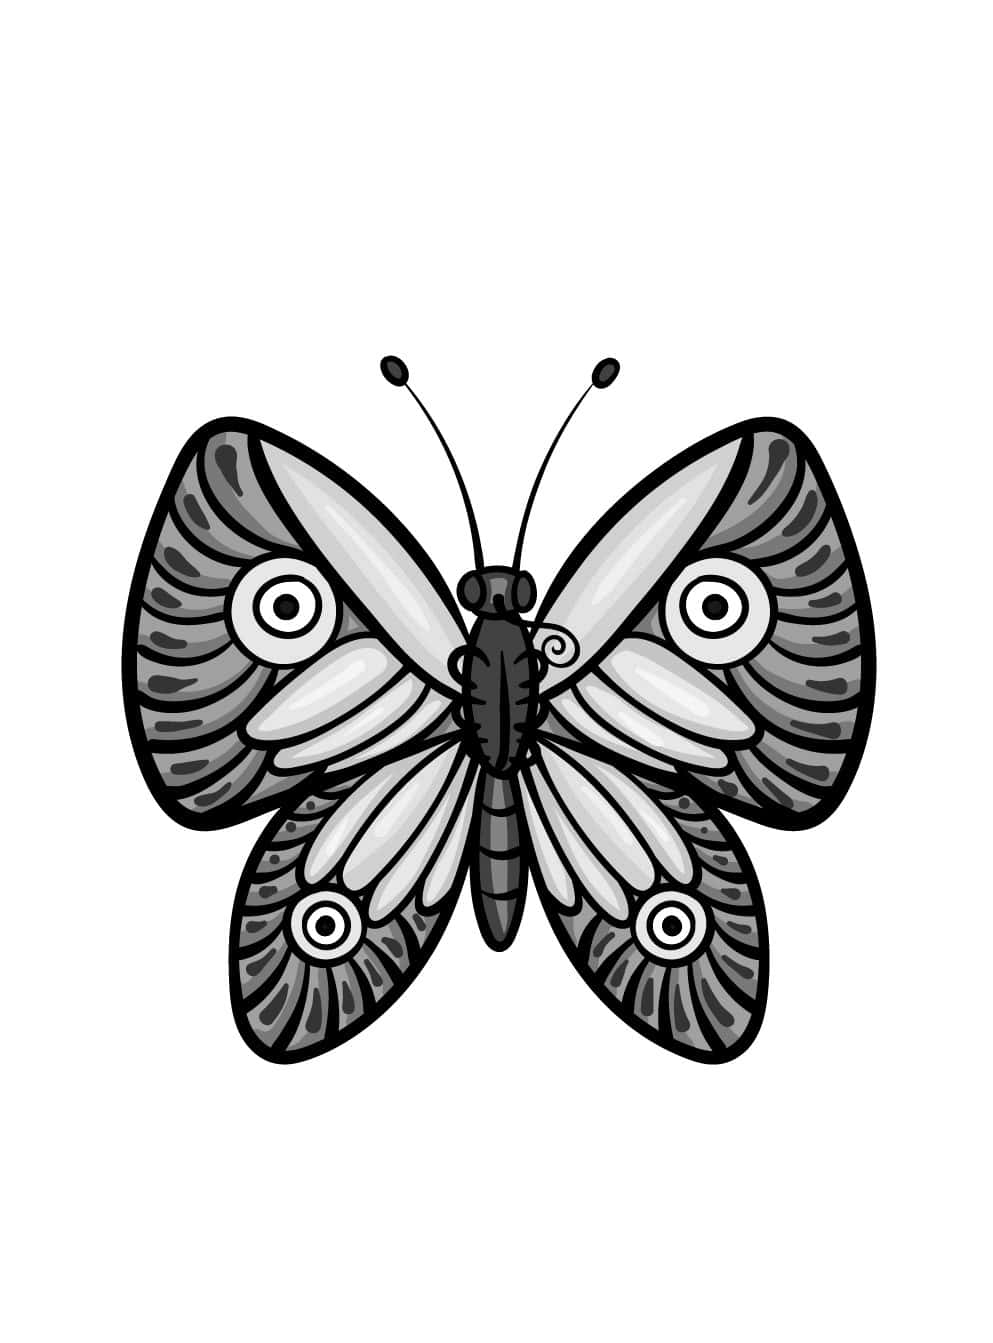 How to Draw a Butterfly with Pen and Ink and Colorful Stippling